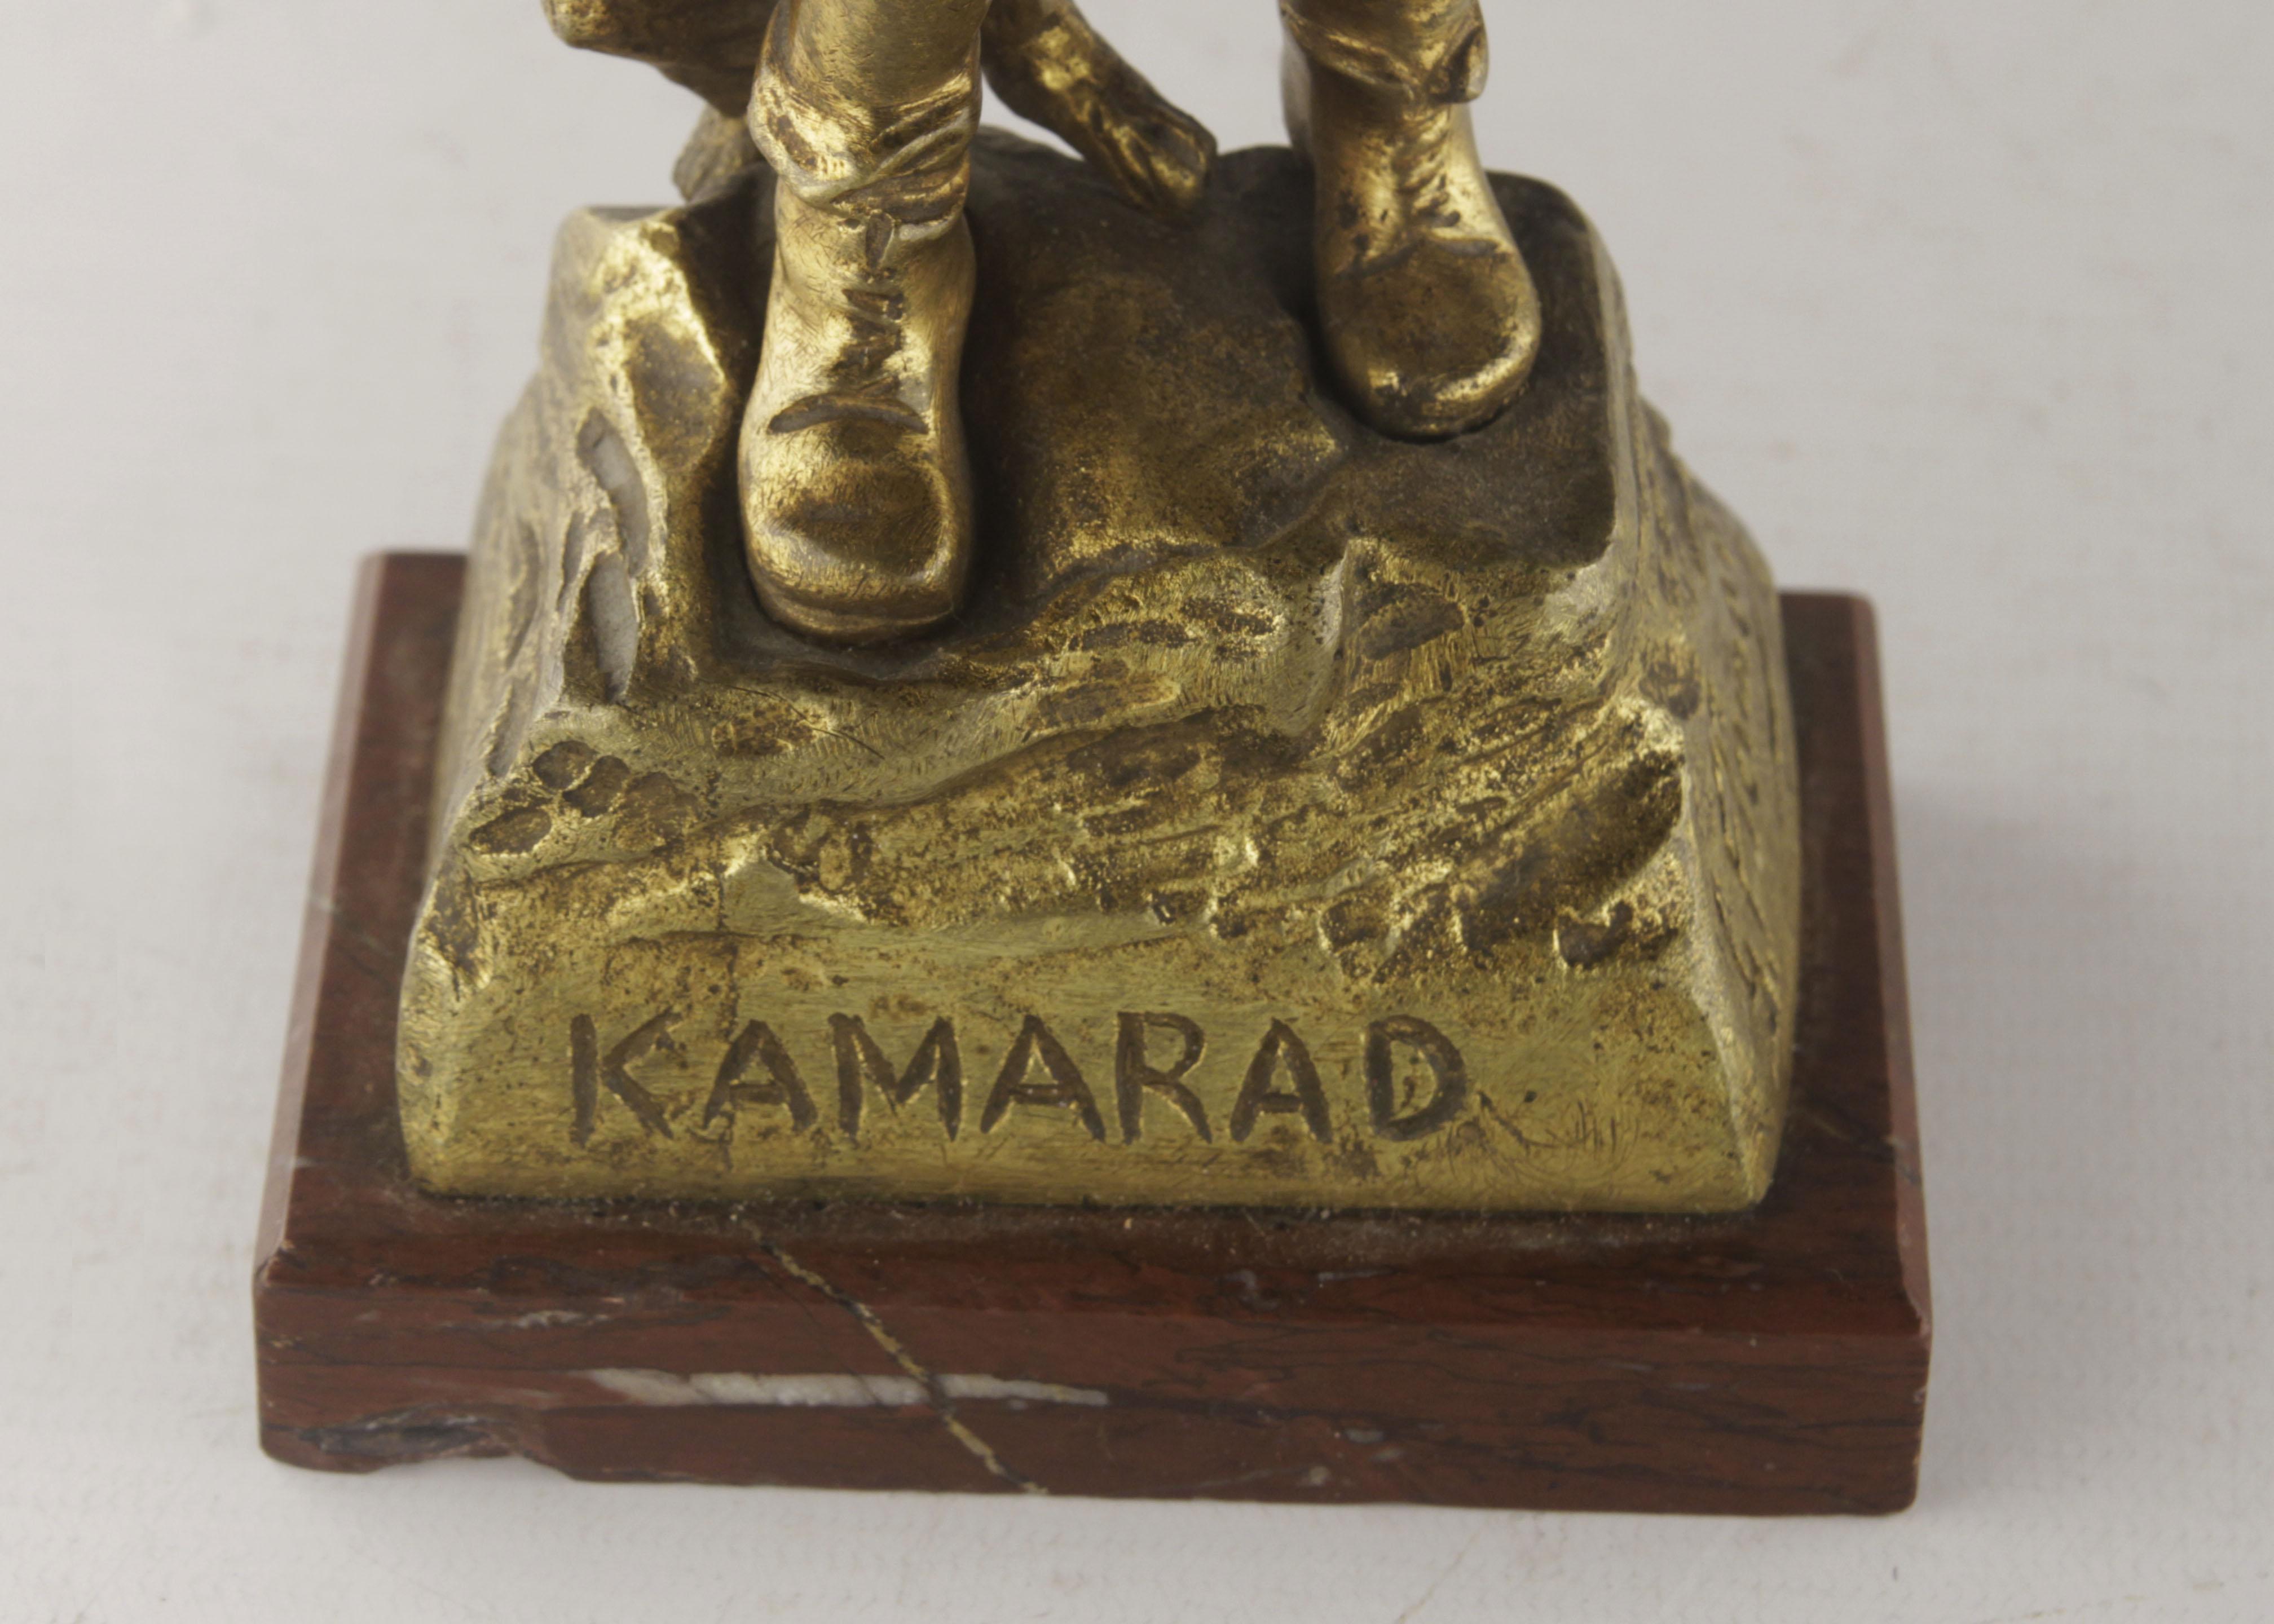 Belle Époque French Gilt Bronze Sculpture of Boy Playing Kamarad by G. Flamand  In Good Condition For Sale In North Miami, FL